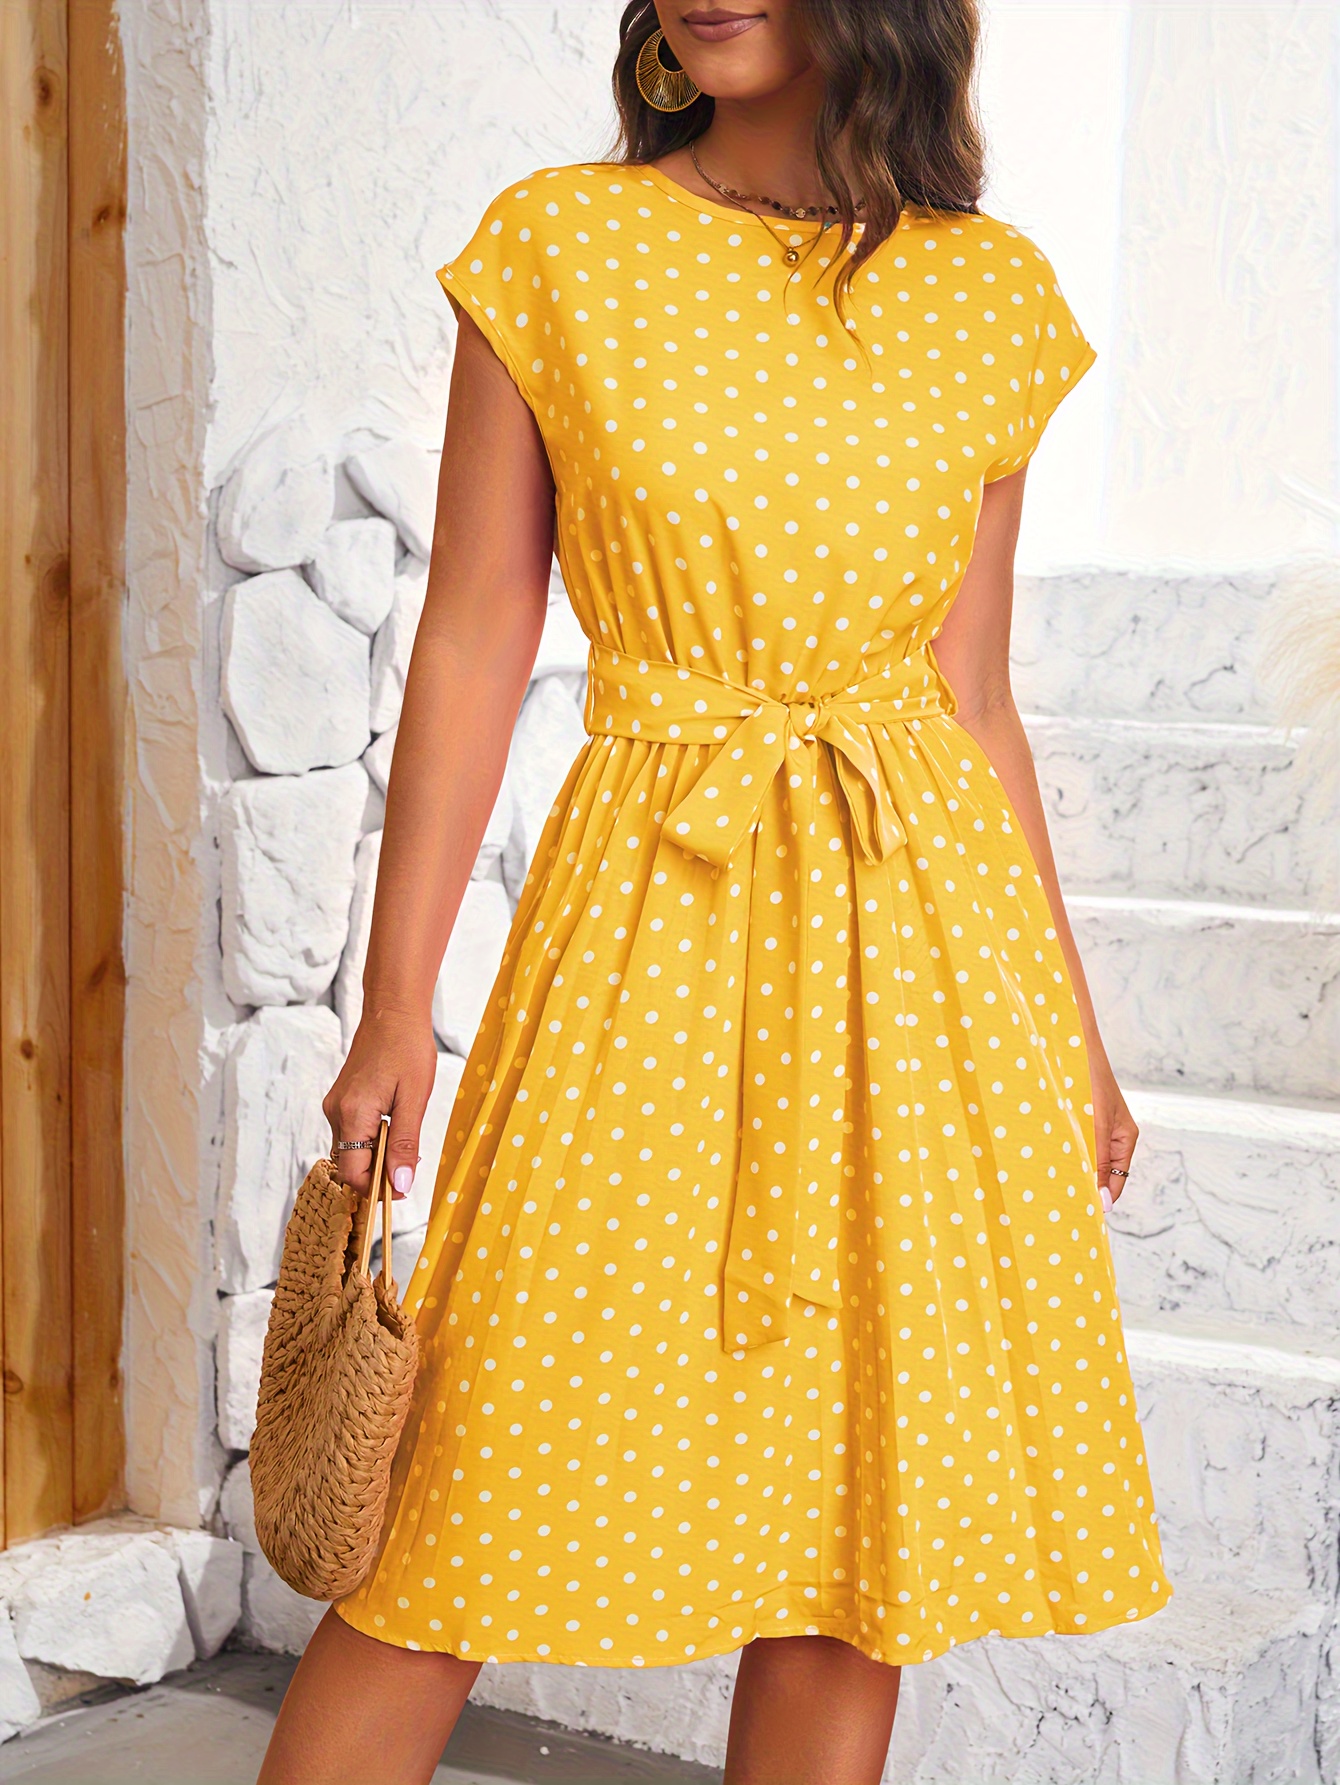 polka dot pleated dress short sleeve casual dress for spring summer womens clothing details 4